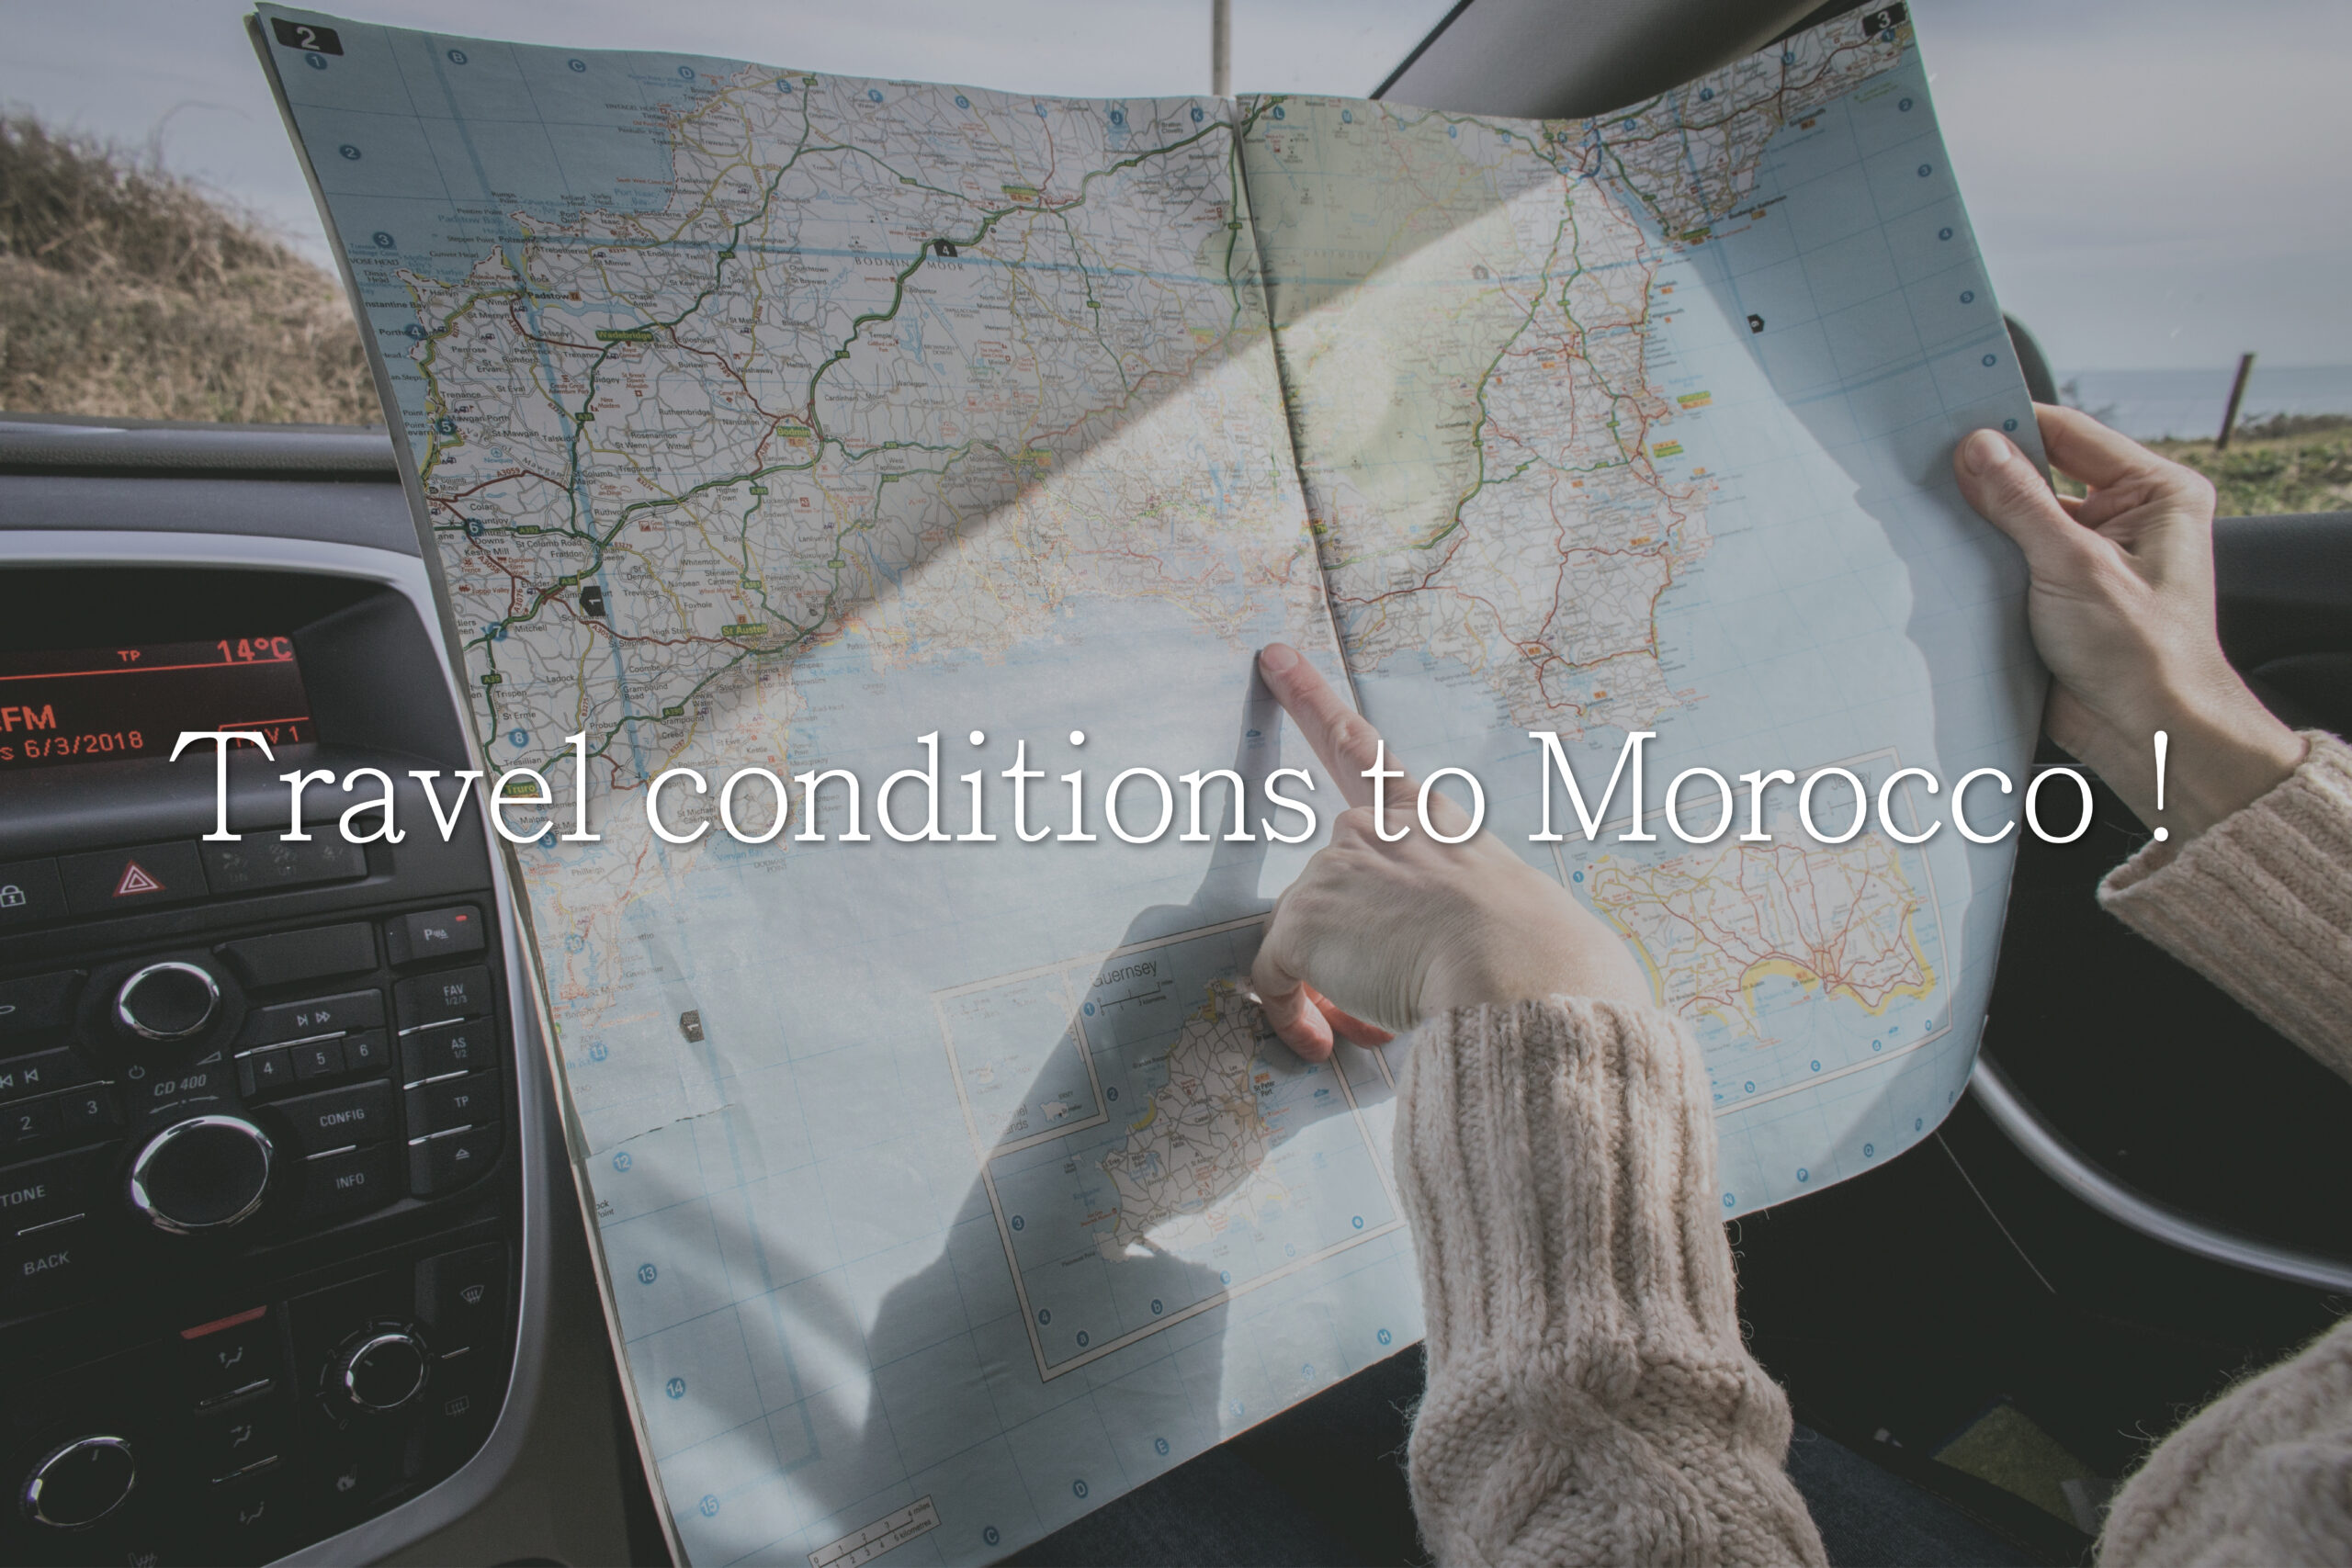 Travel conditions to Morocco